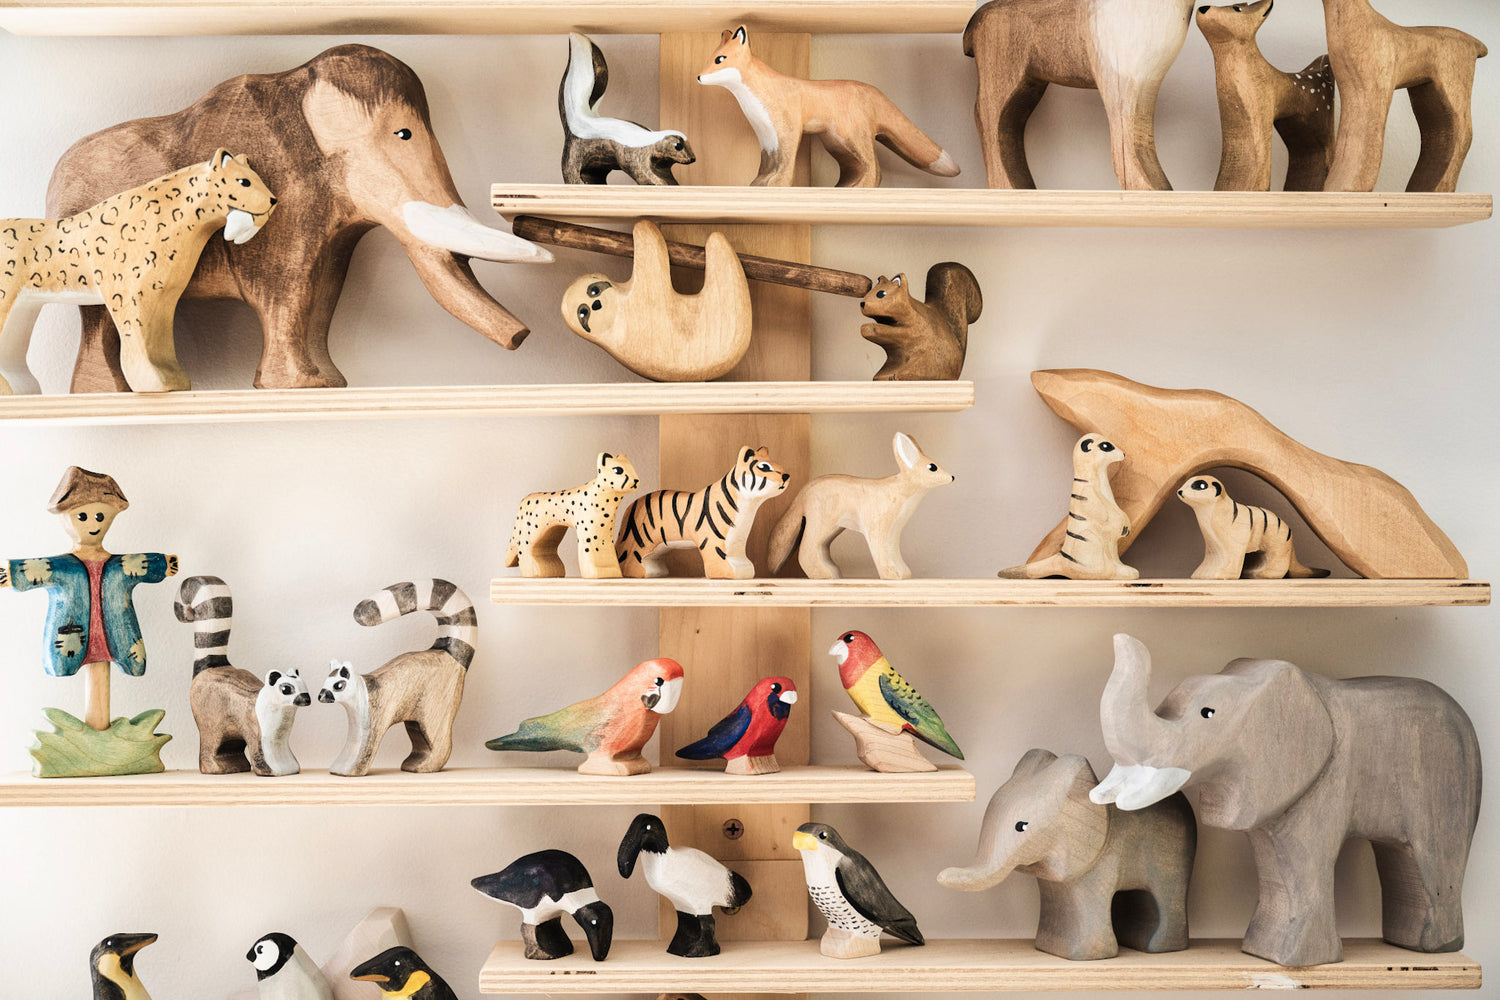 Wooden Toys, Crafted Wooden Toys and Gifts